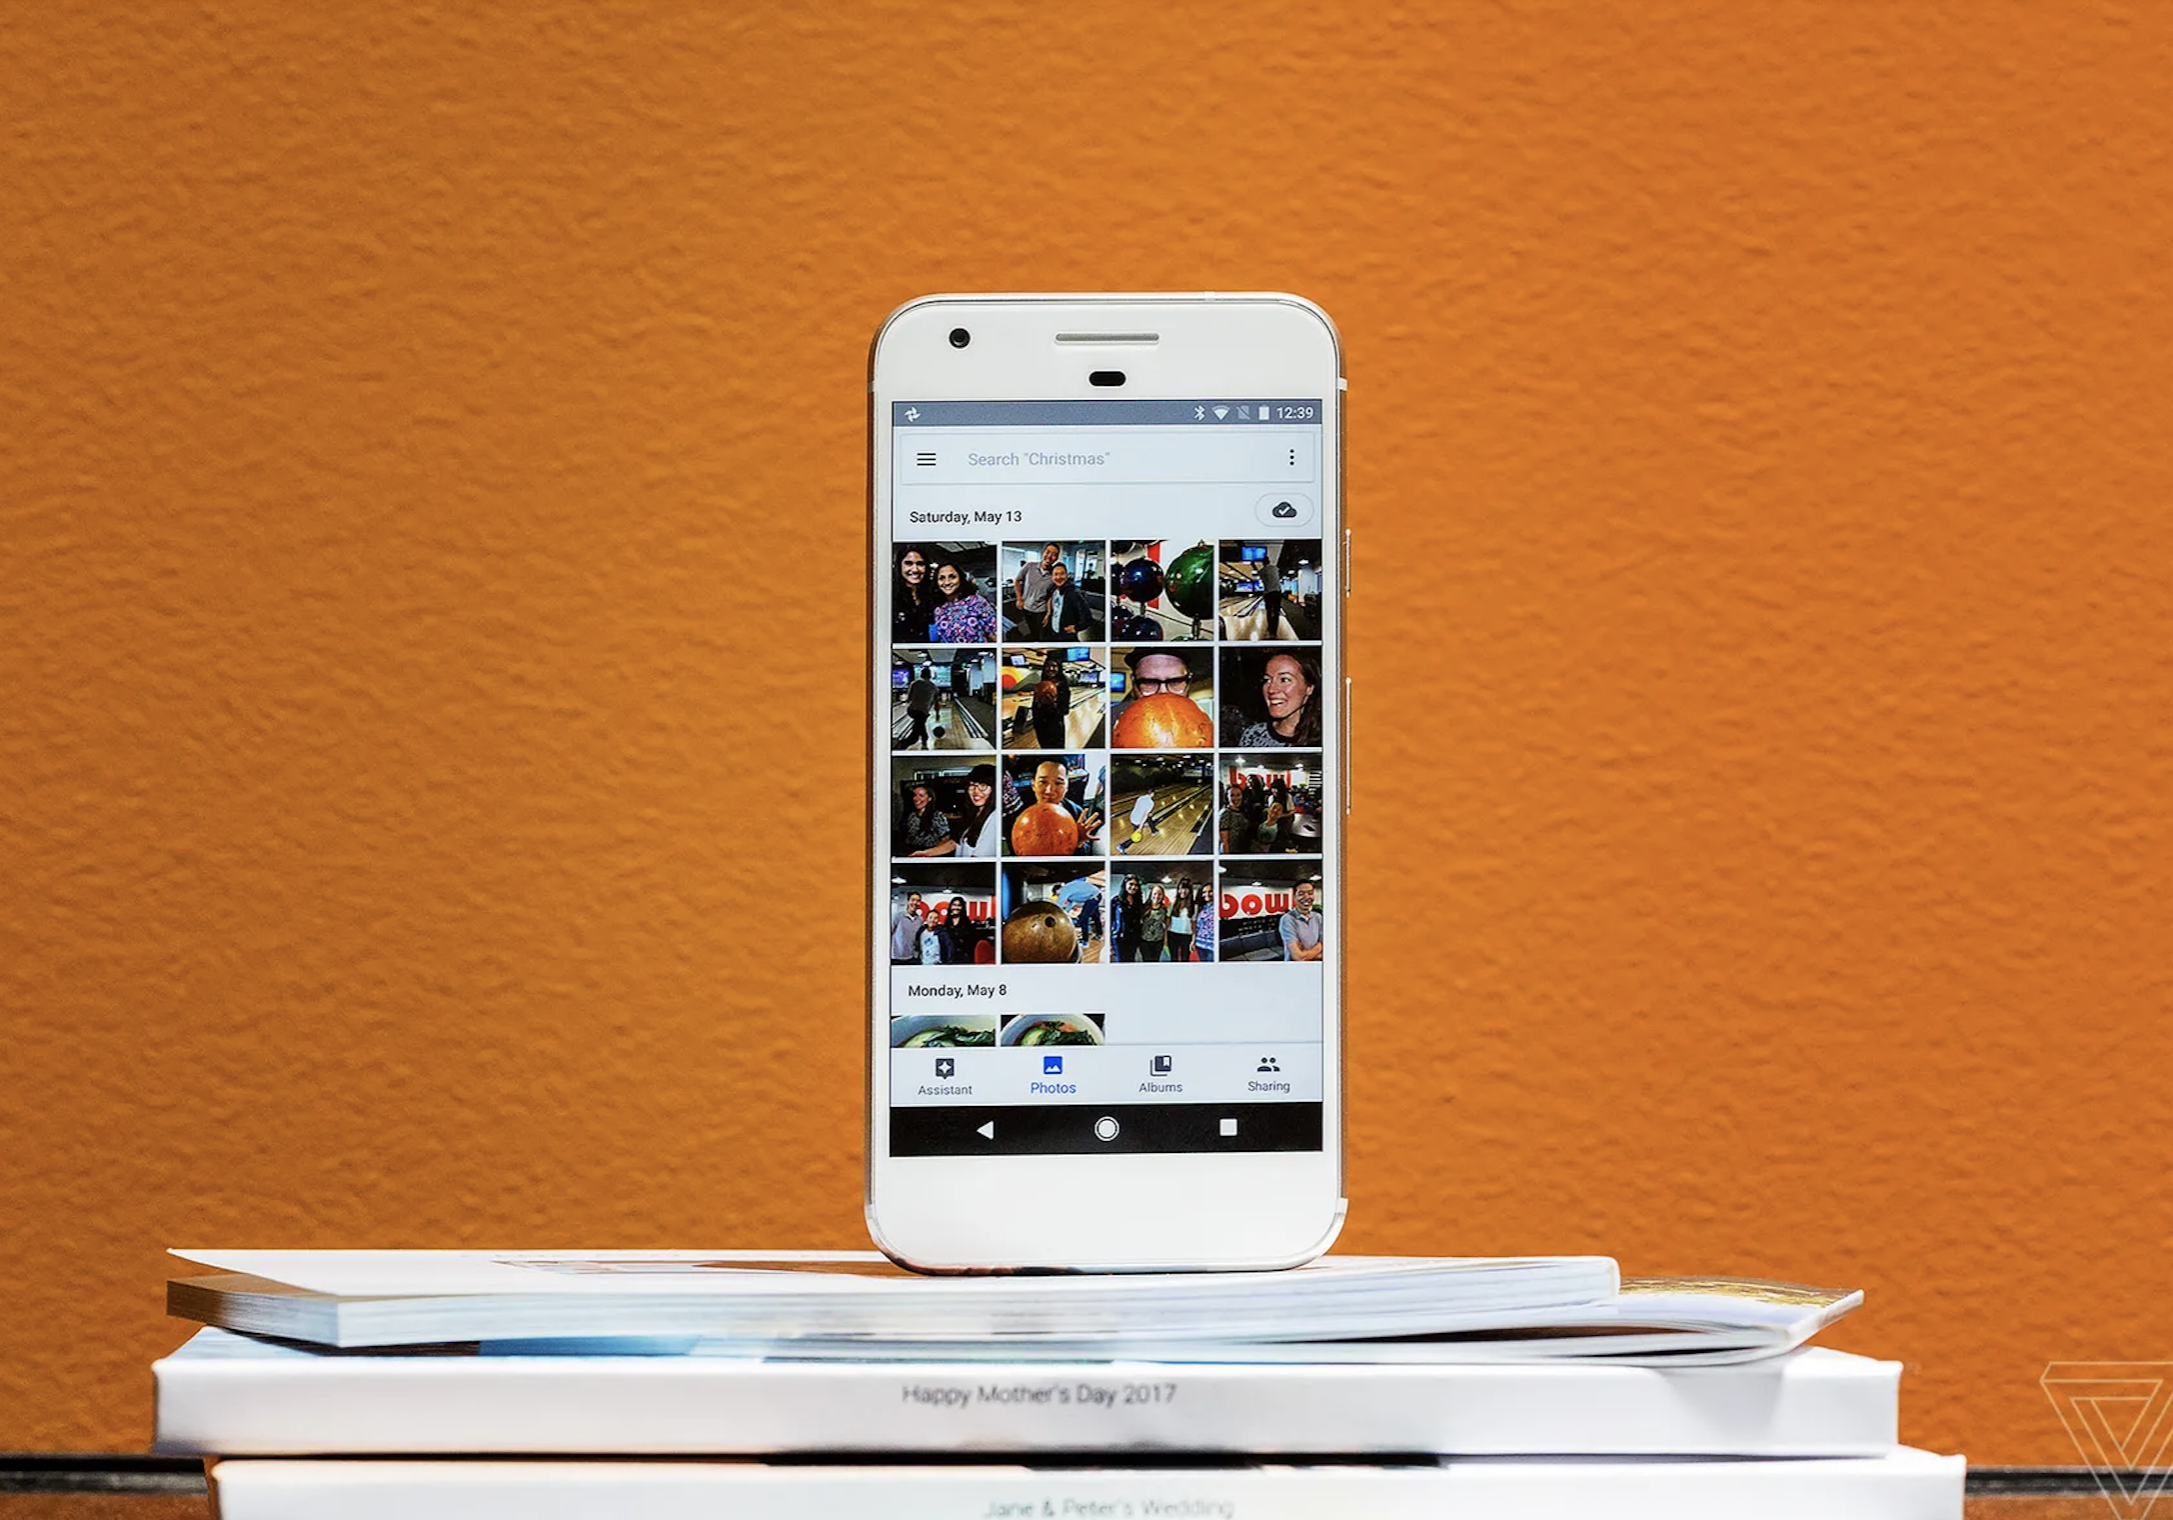 An iphone displaying grid of images, standing on top of a stack of paper